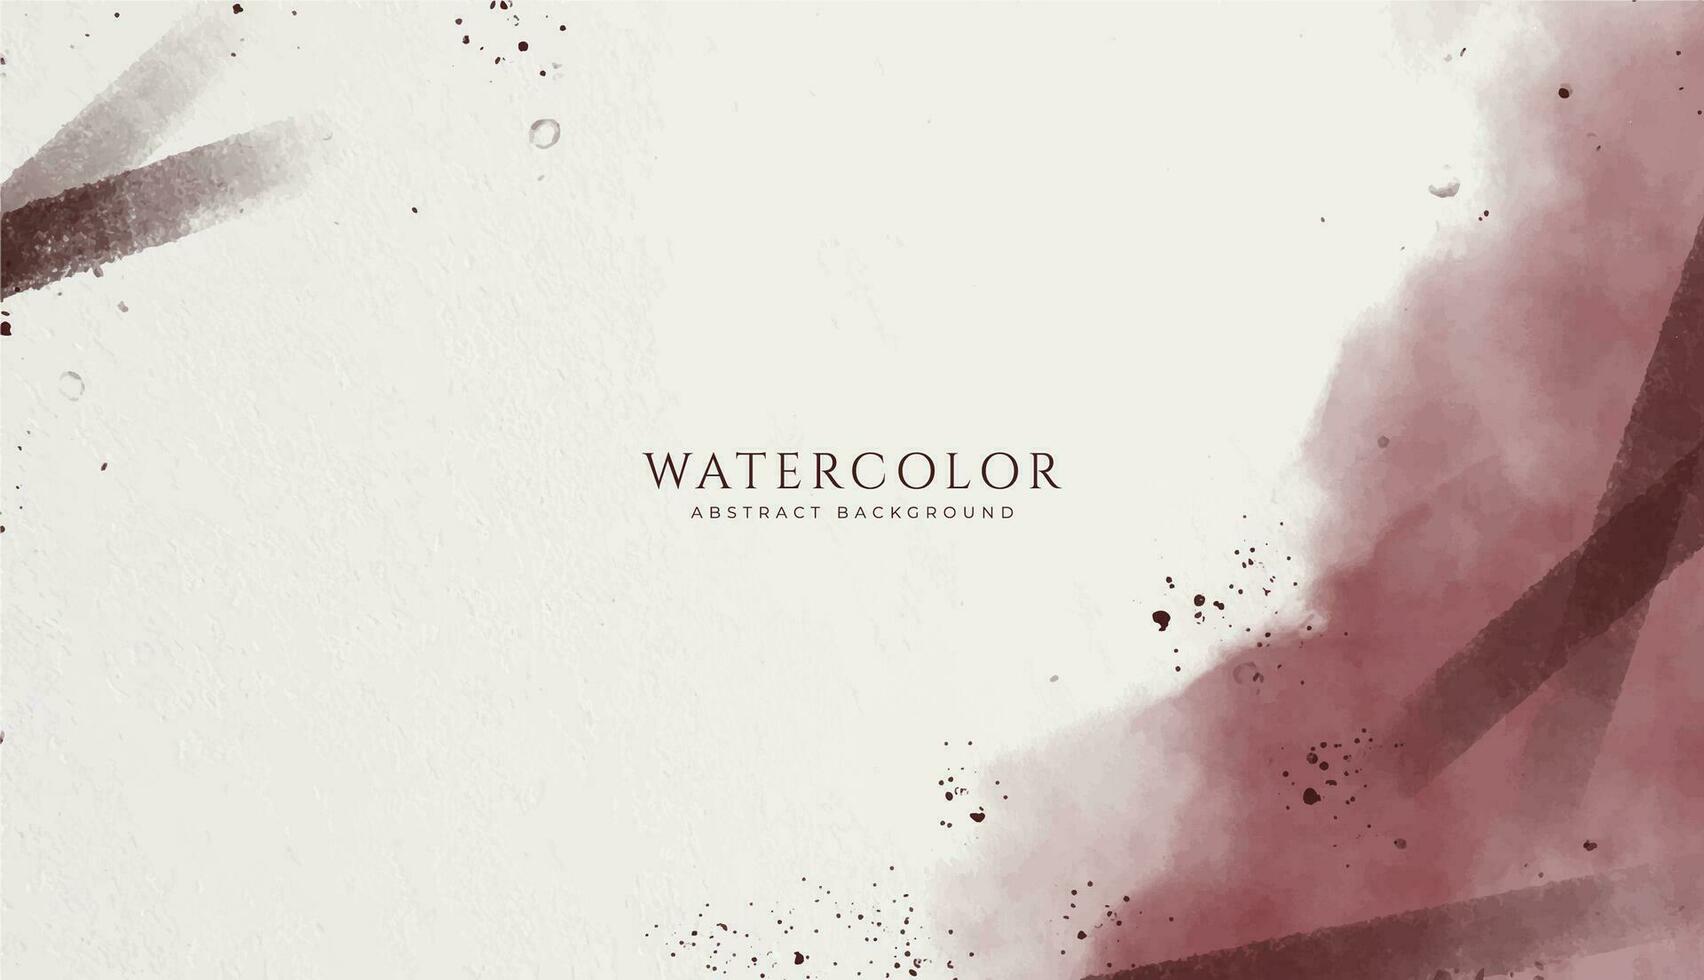 Abstract horizontal grunge watercolor background. Neutral light colored empty space background illustration vector